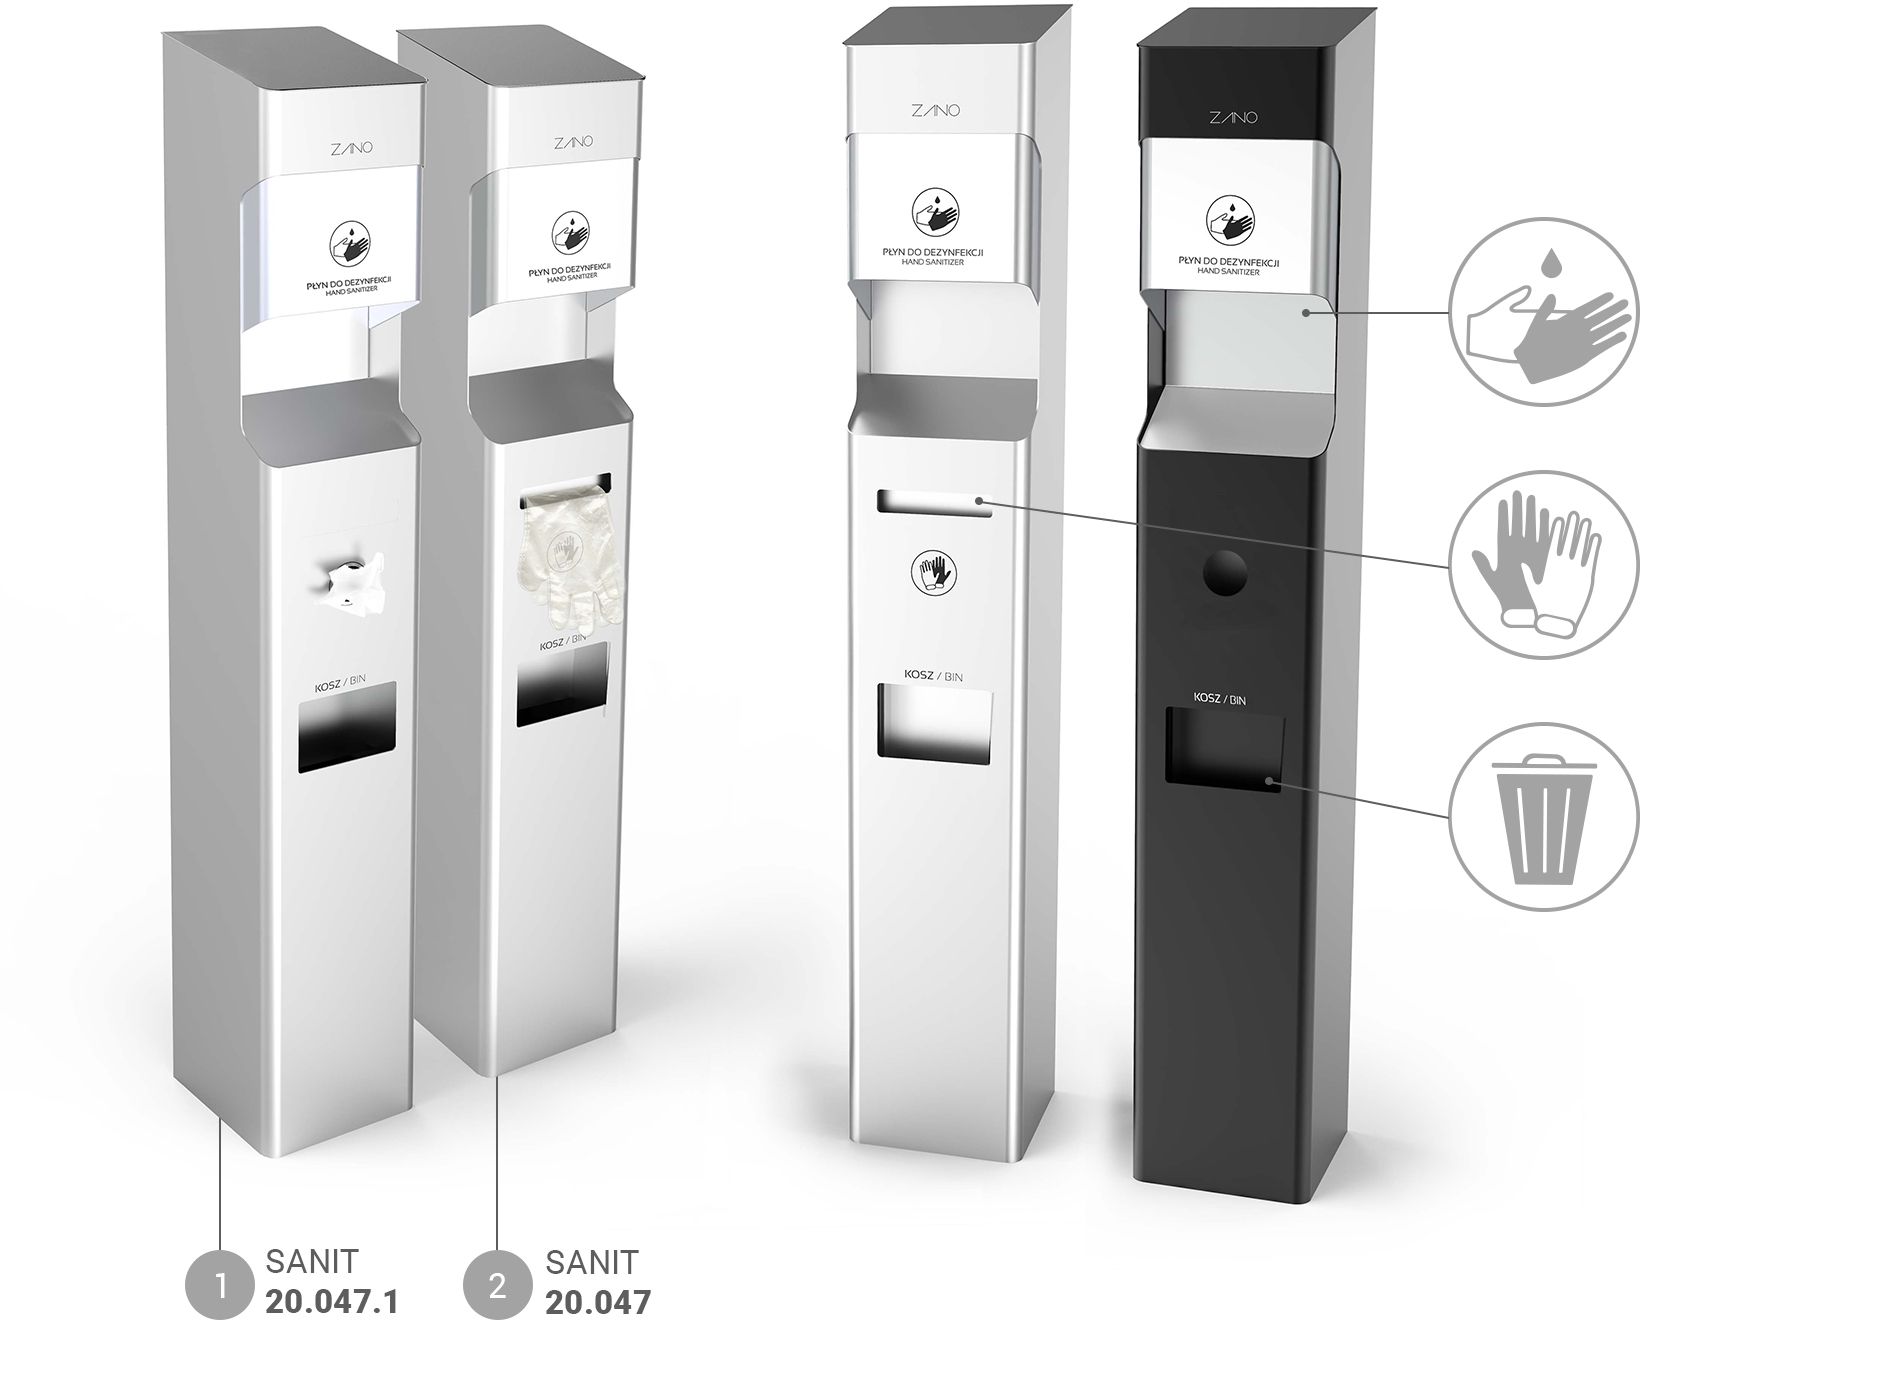 Hand disinfection stations for public use